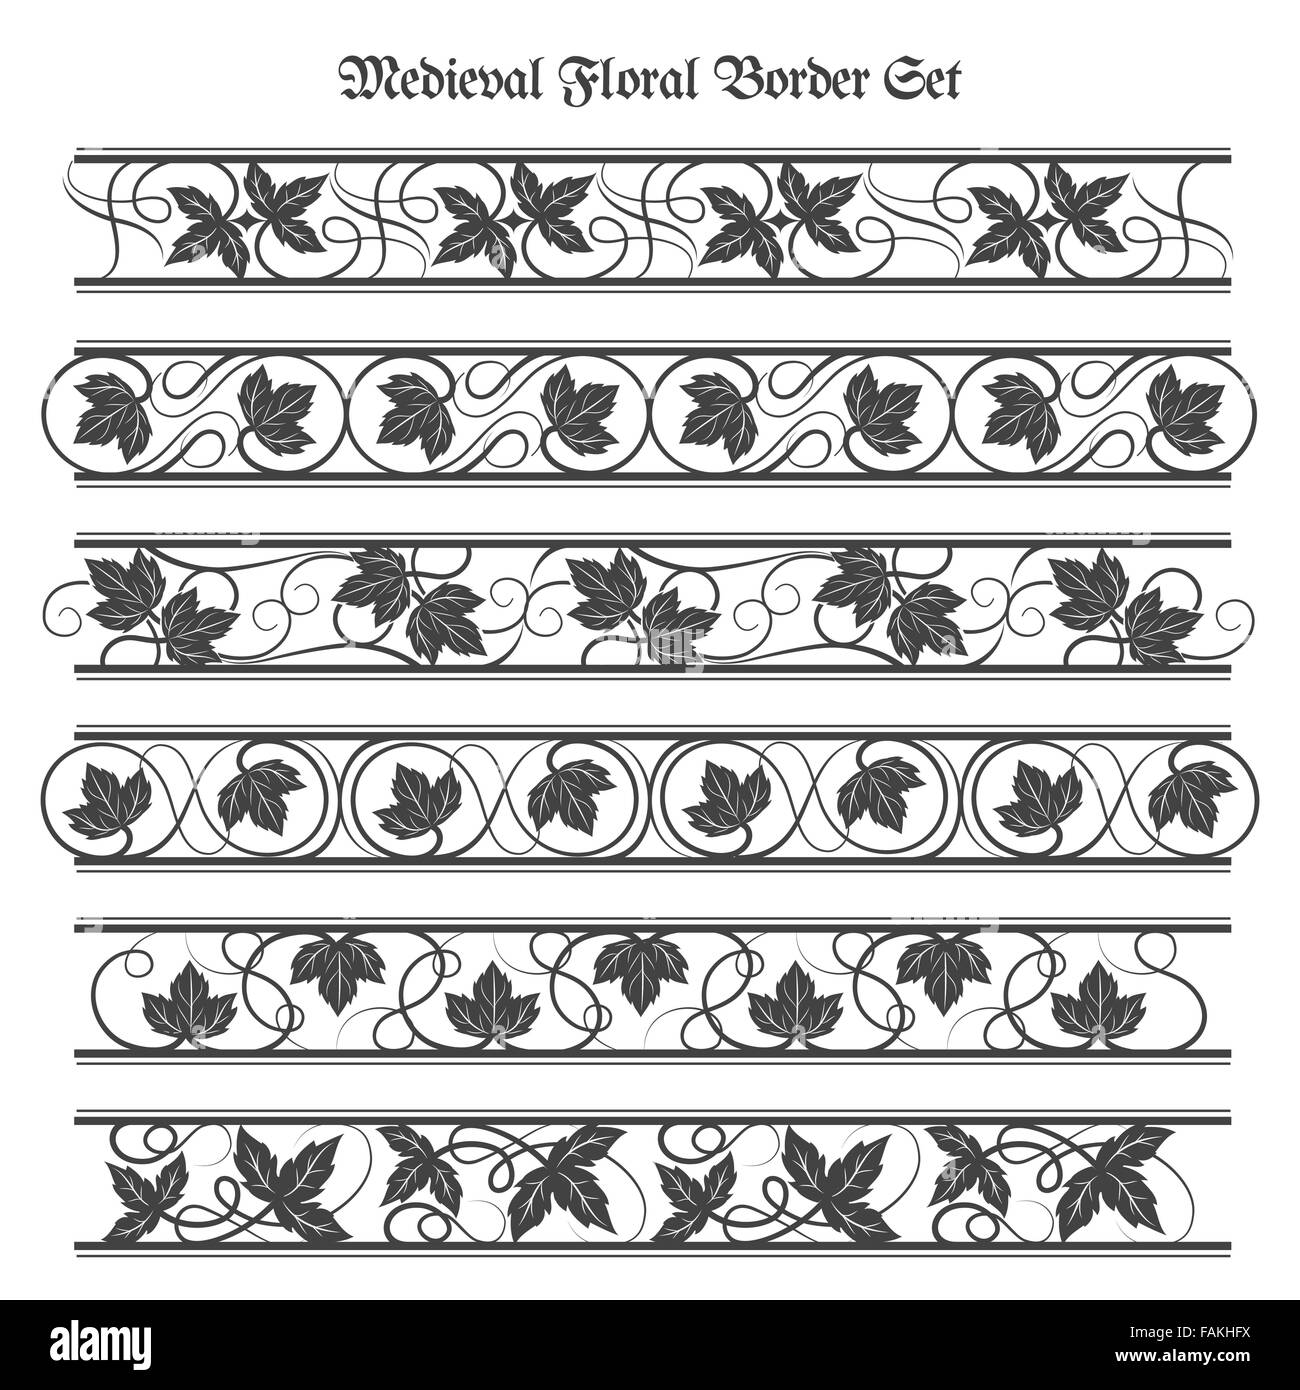 Vintage ornate floral border set. Leaves and swirls pattern in baroque style. Isolated on white. Stock Vector